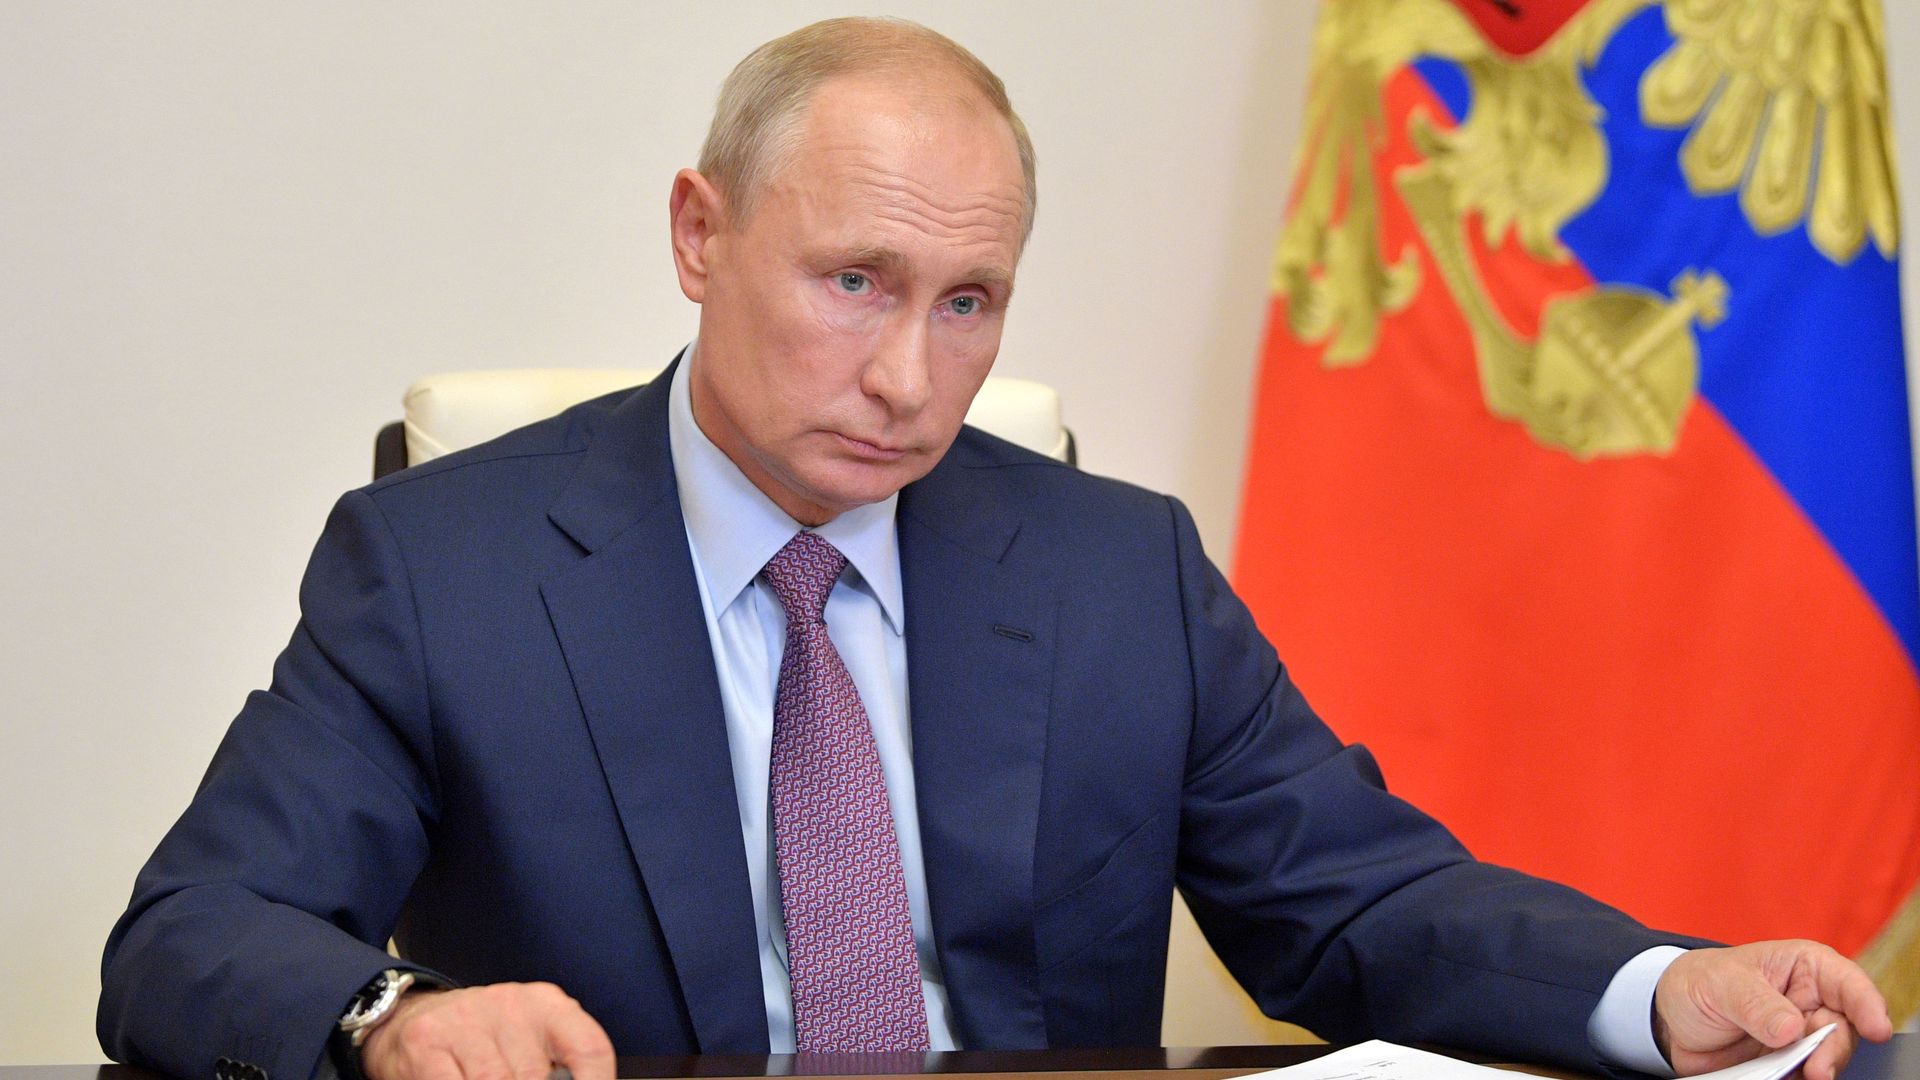 Vladimir Putin sits behind a desk holding papers